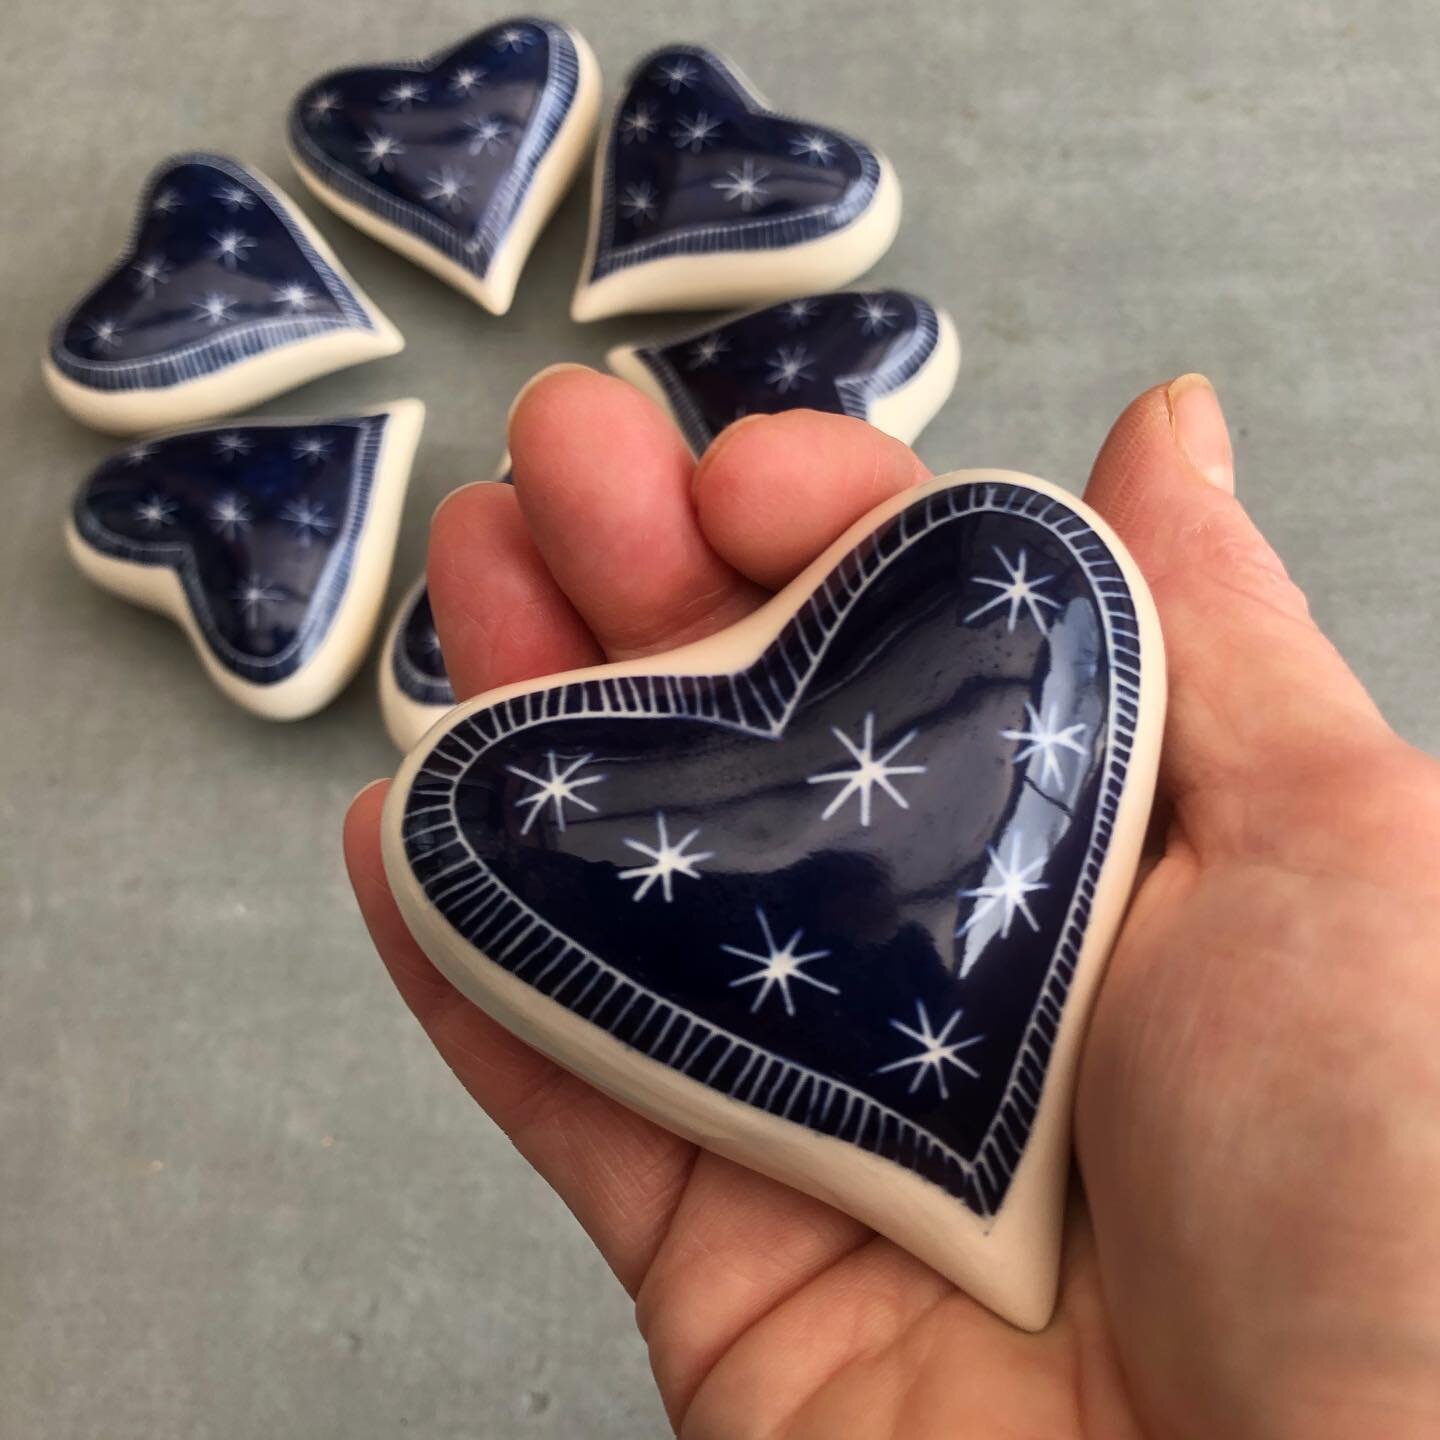 I love making these heart shaped pebbles . They are so nice to hold in your hands and think of loved ones #heartsofinstagram #ceramichearts❤ #ceramicpebbles #valentine